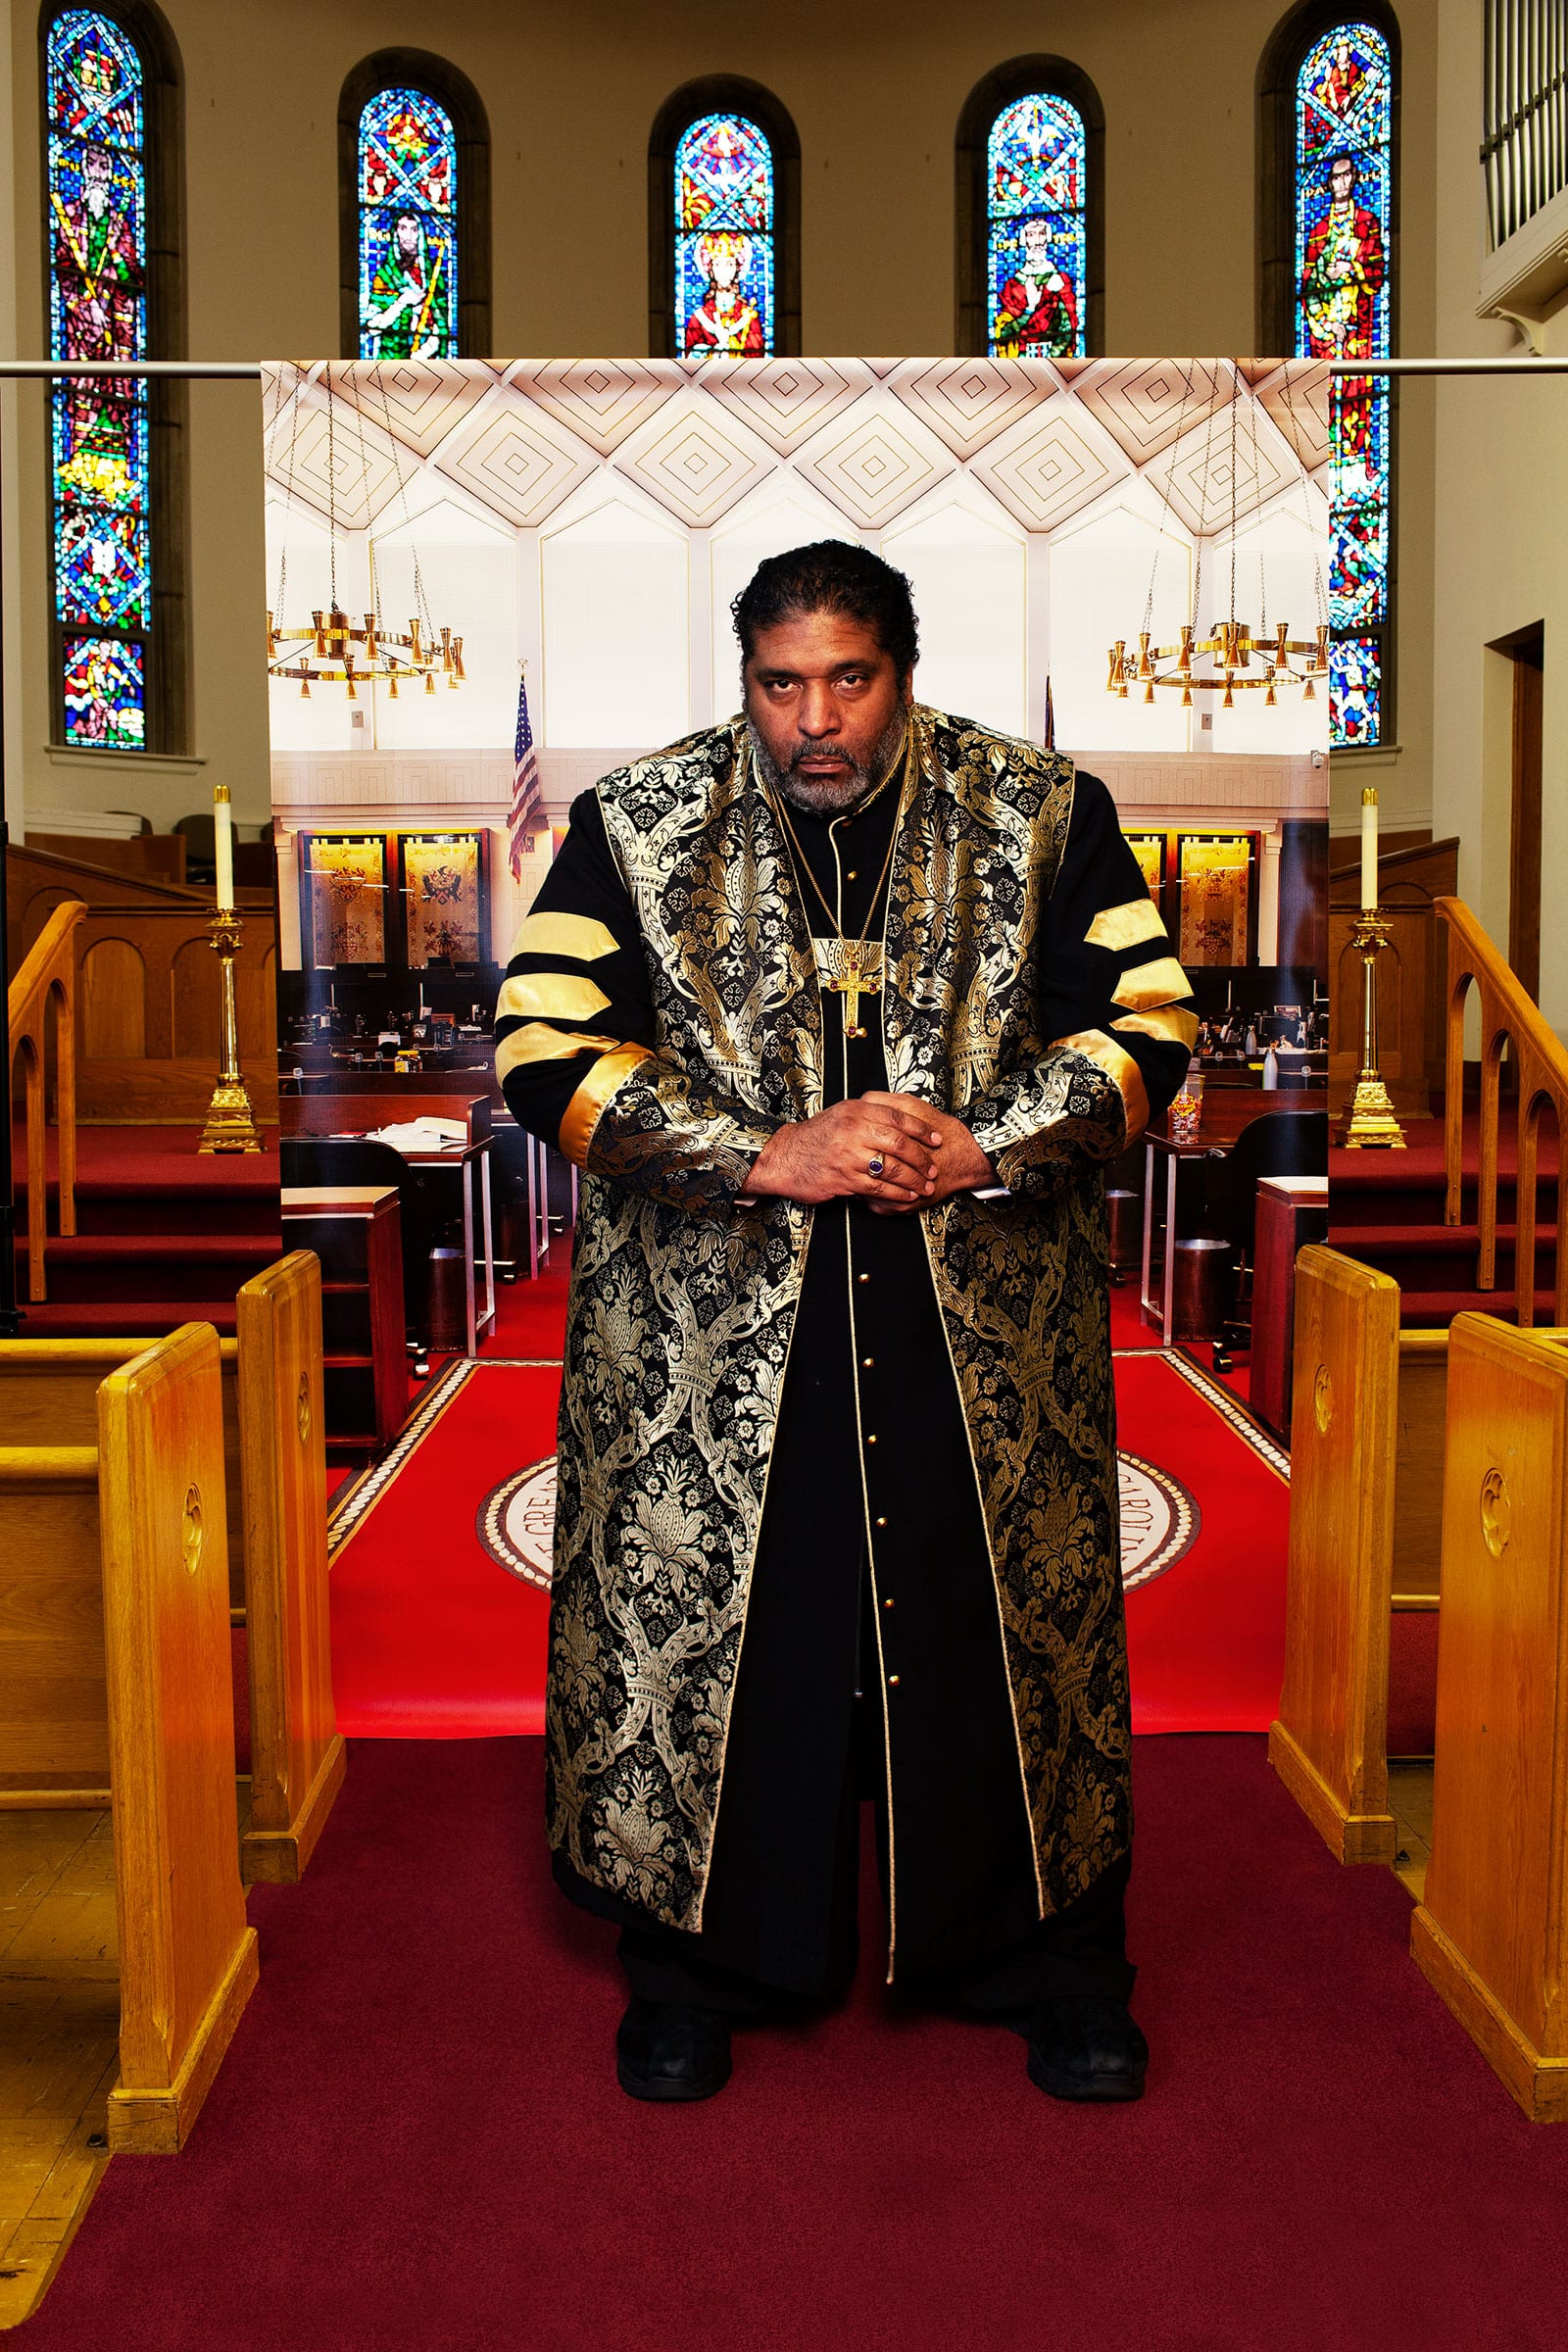 The Rev. William J. Barber II at Pullen Memorial Baptist Church in Raleigh, N.C., on Jan. 27, before a backdrop showing the North Carolina house of representatives chamber where he was arrested in 2011.  The Equalizers,  March 2 issue.